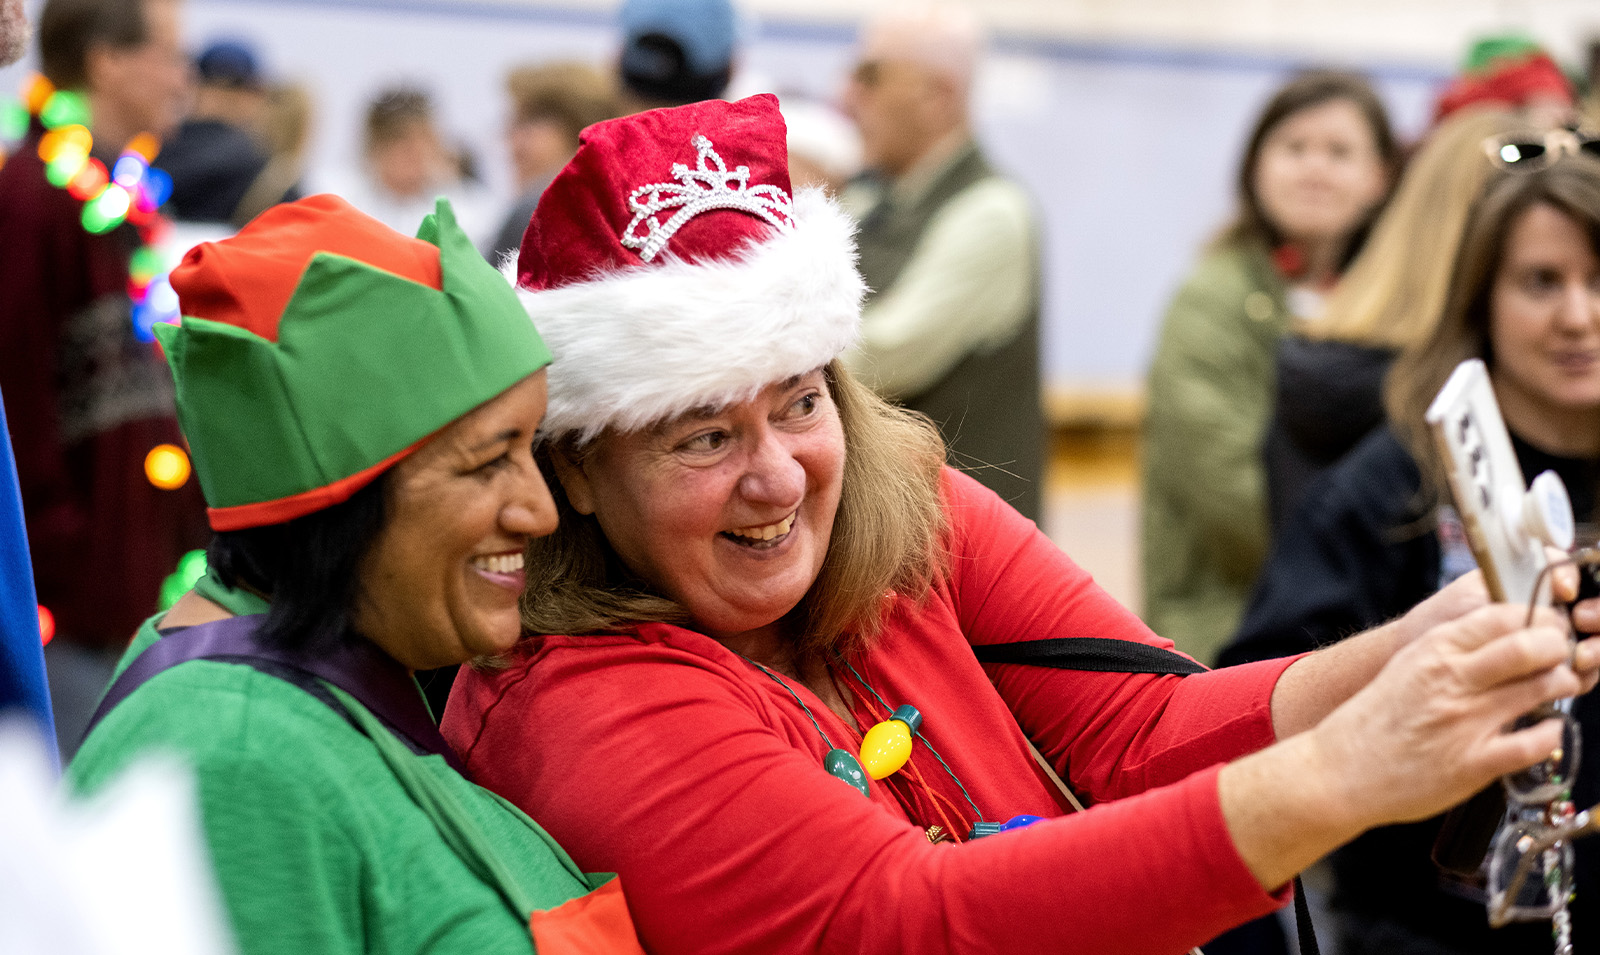 Two women, one wearing a Santa hat and the other dressed up as an elf, taking a selfie.